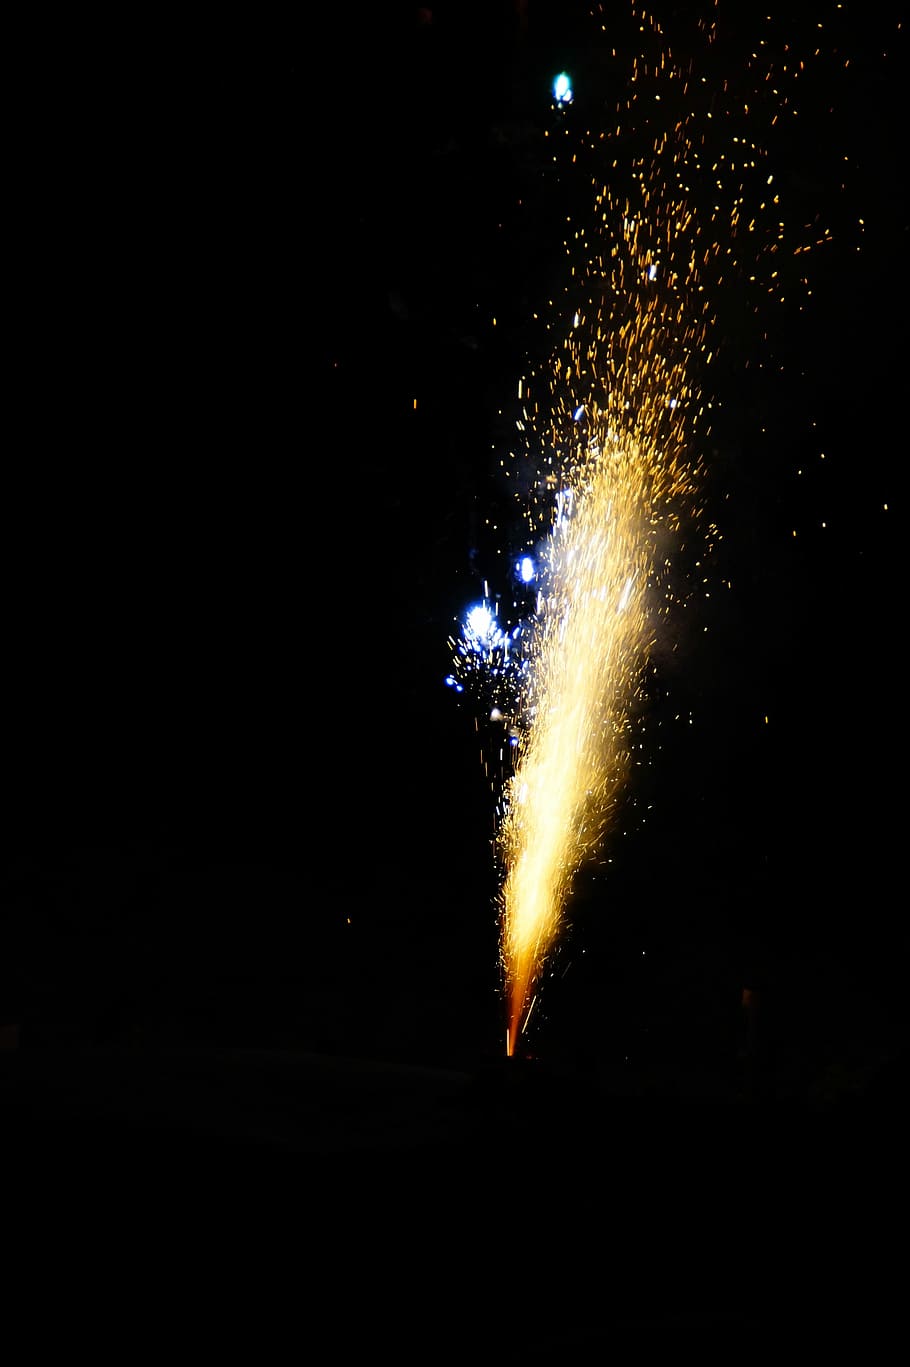 Shower, Sparks, Radio, Spray, Night, shower of sparks, fireworks, new year's day, new year's eve, sylvester